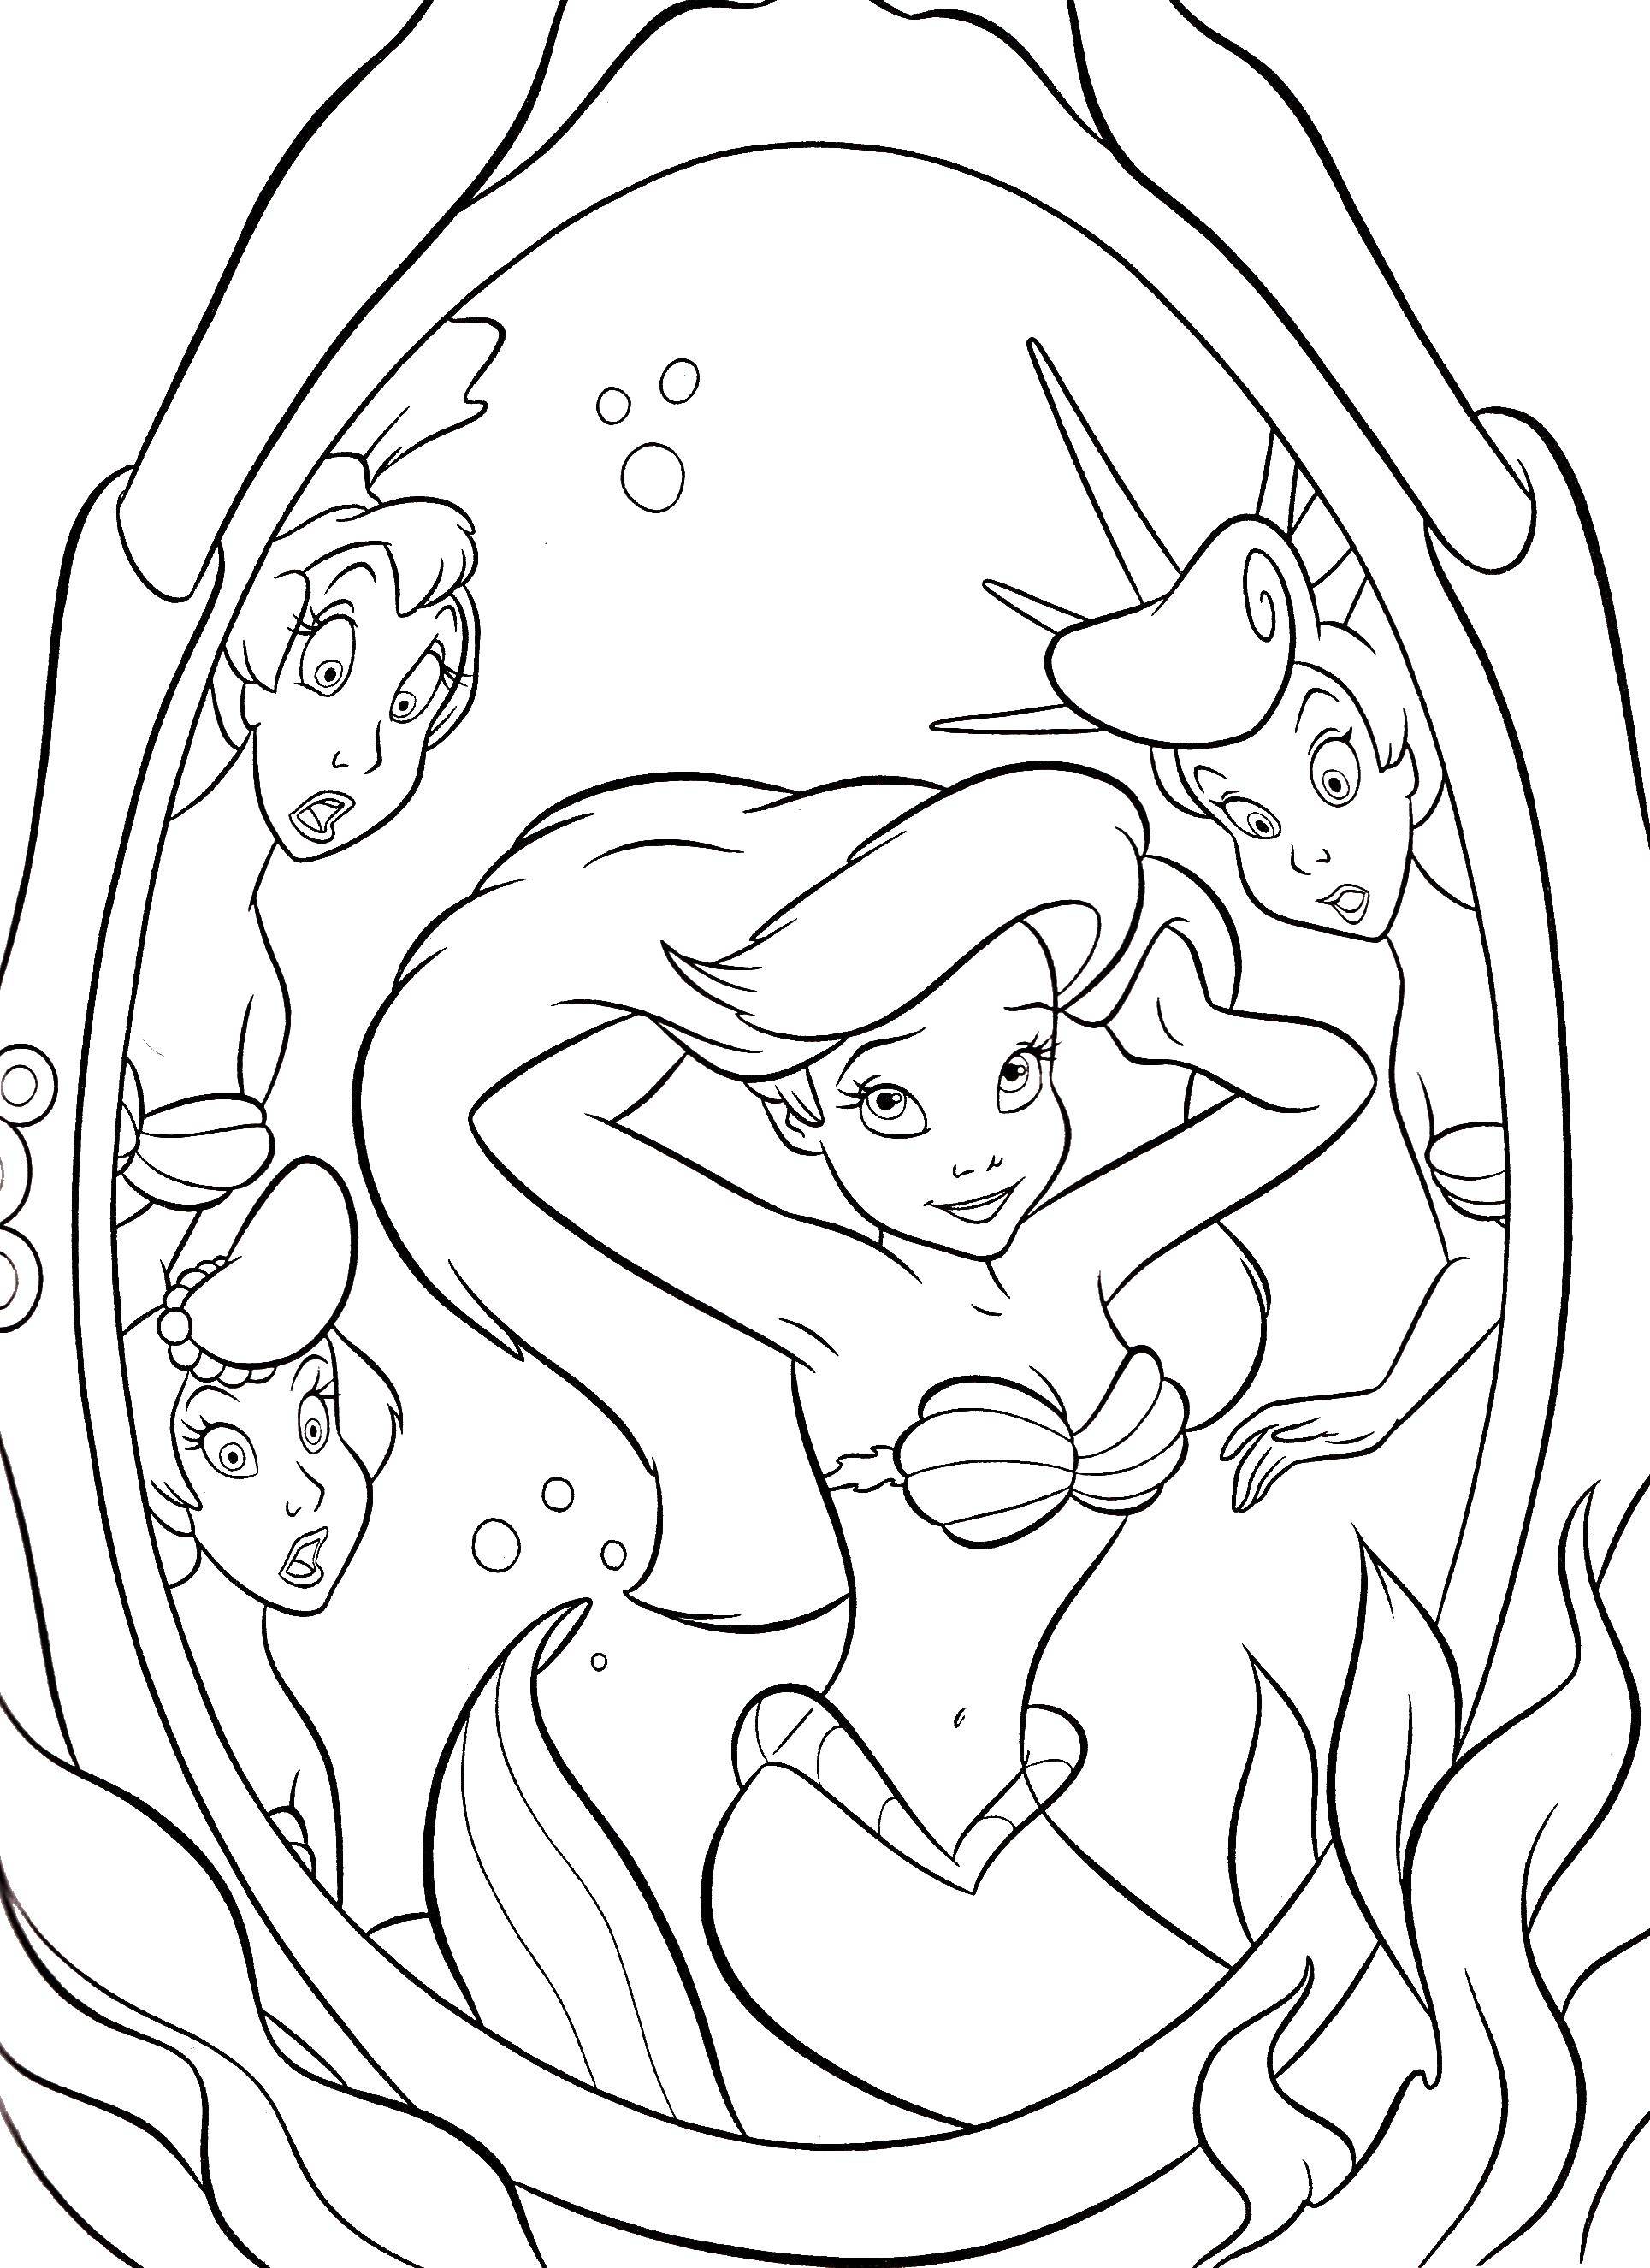 Coloring Little mermaid and Ariel. Category The little mermaid. Tags:  the little mermaid, Ariel, cartoons.